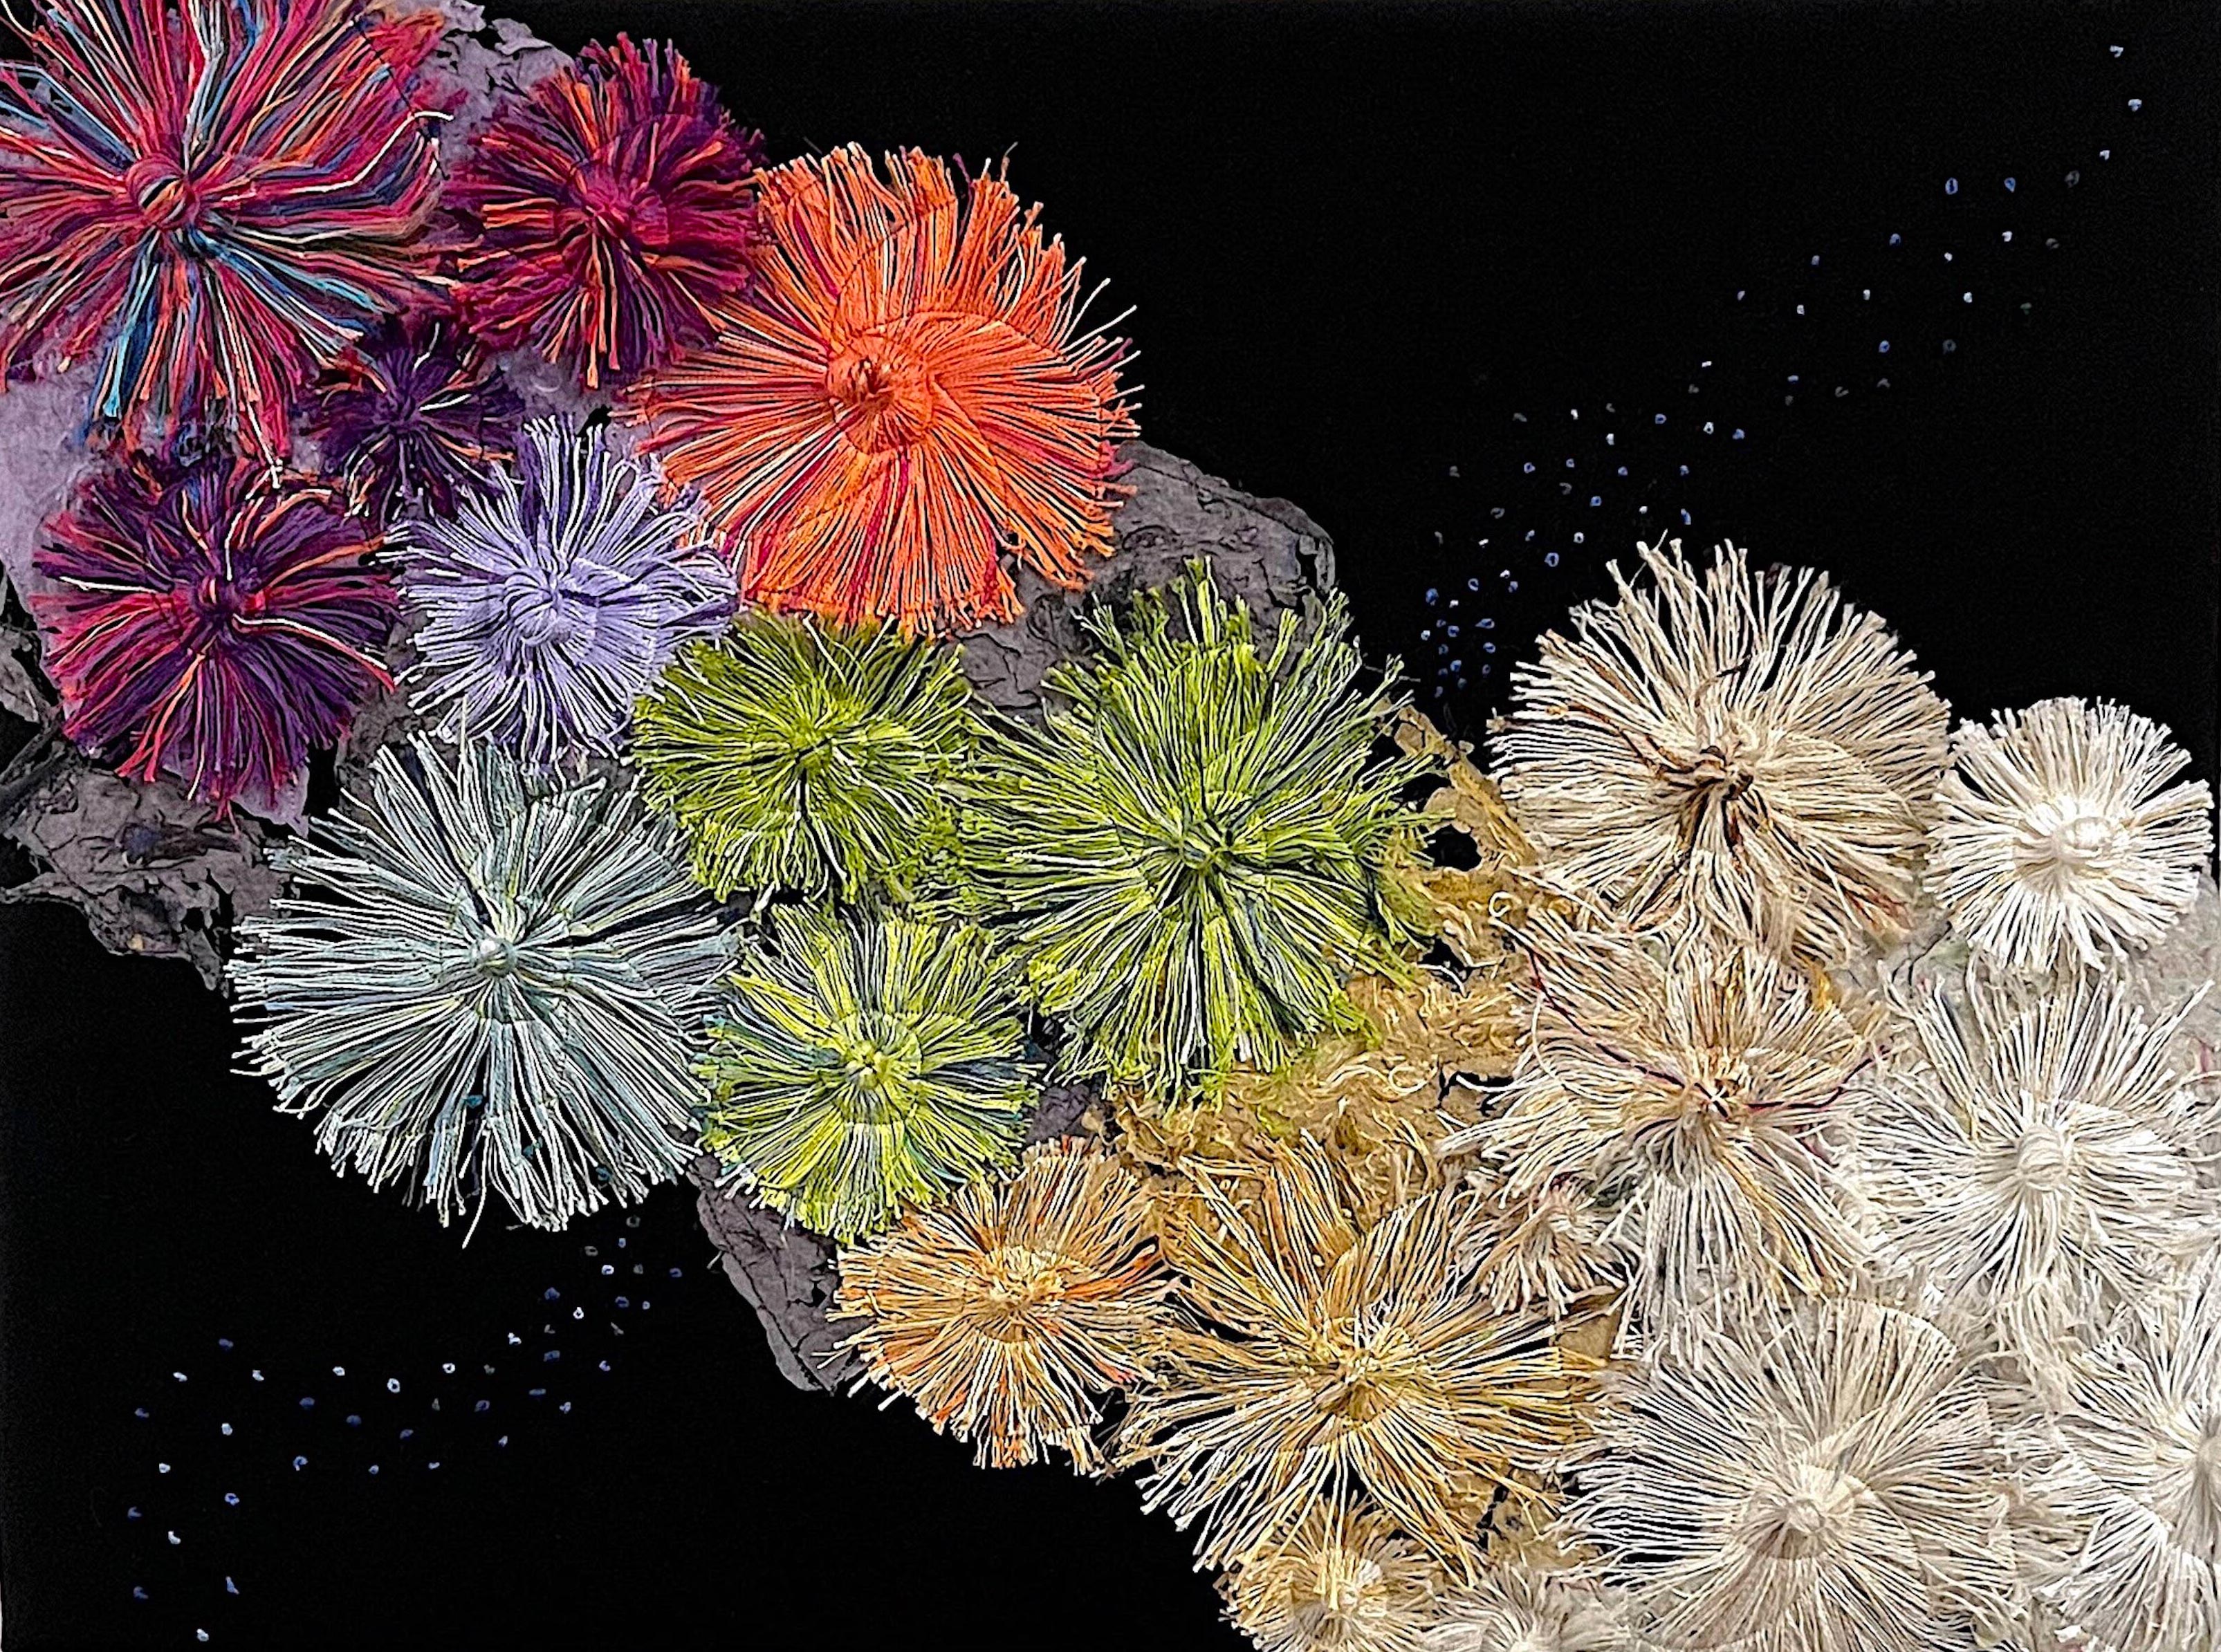 Art  handmade paper, upcycled warp yarn remnants representing Coral reef from top left to bottom right colorful coral turns to bleached coral against a black backdrop.